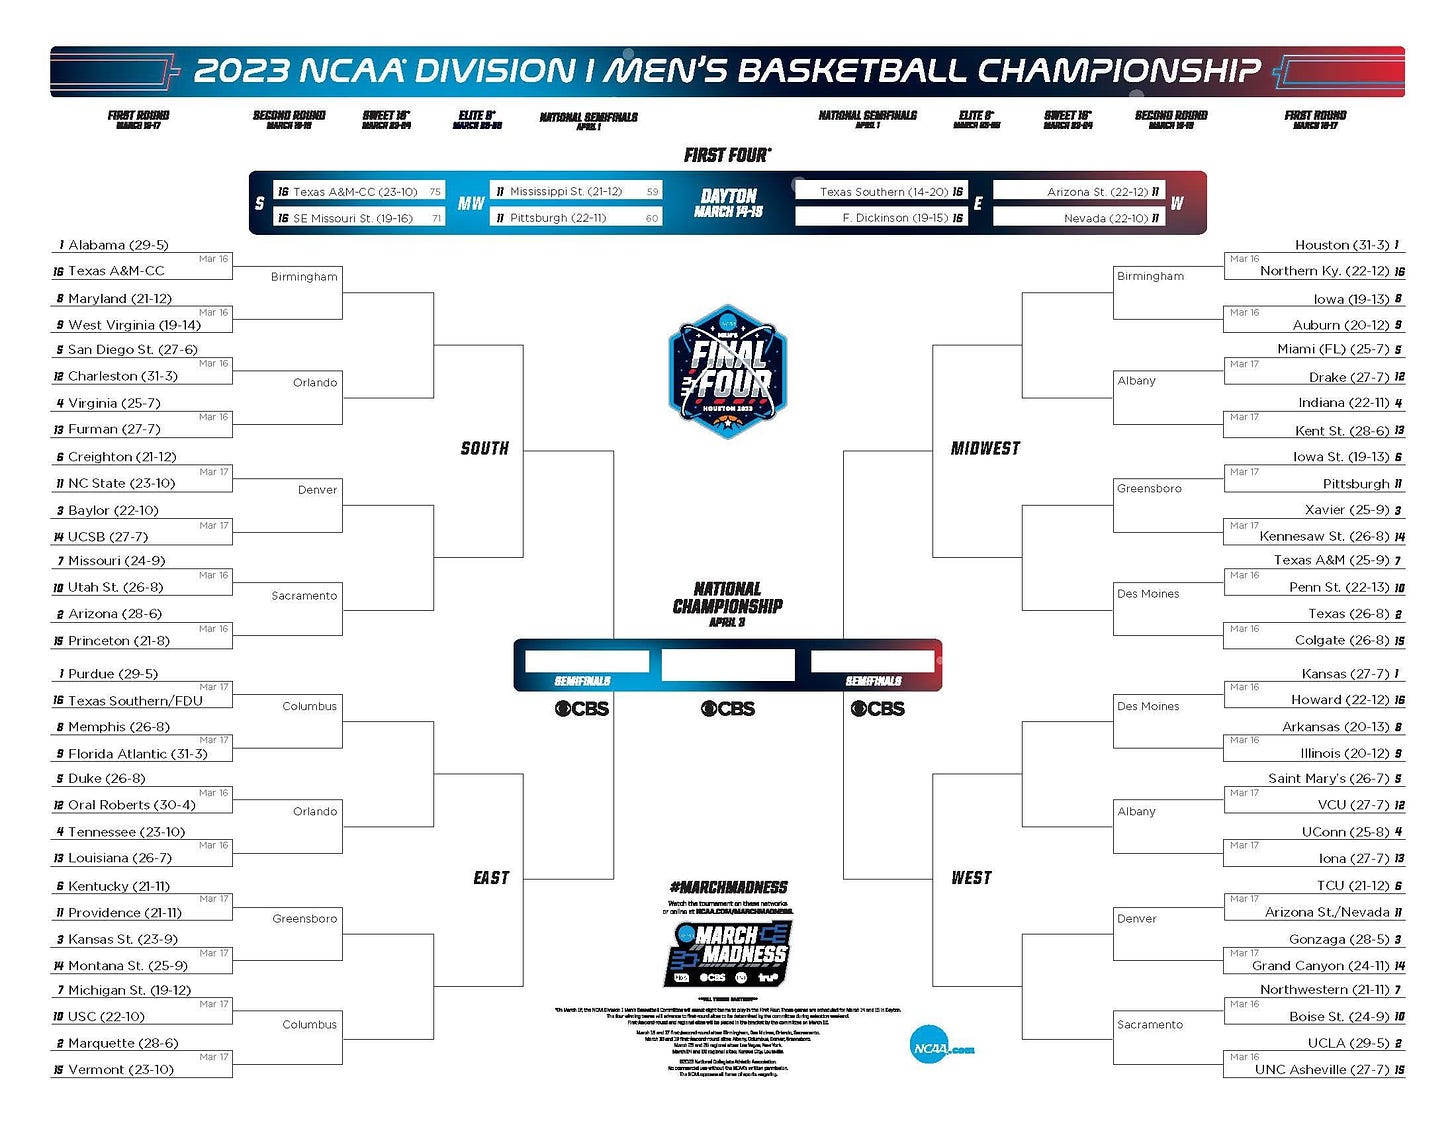 Latest bracket, schedule and scores for 2023 NCAA men's tournament | NCAA .com